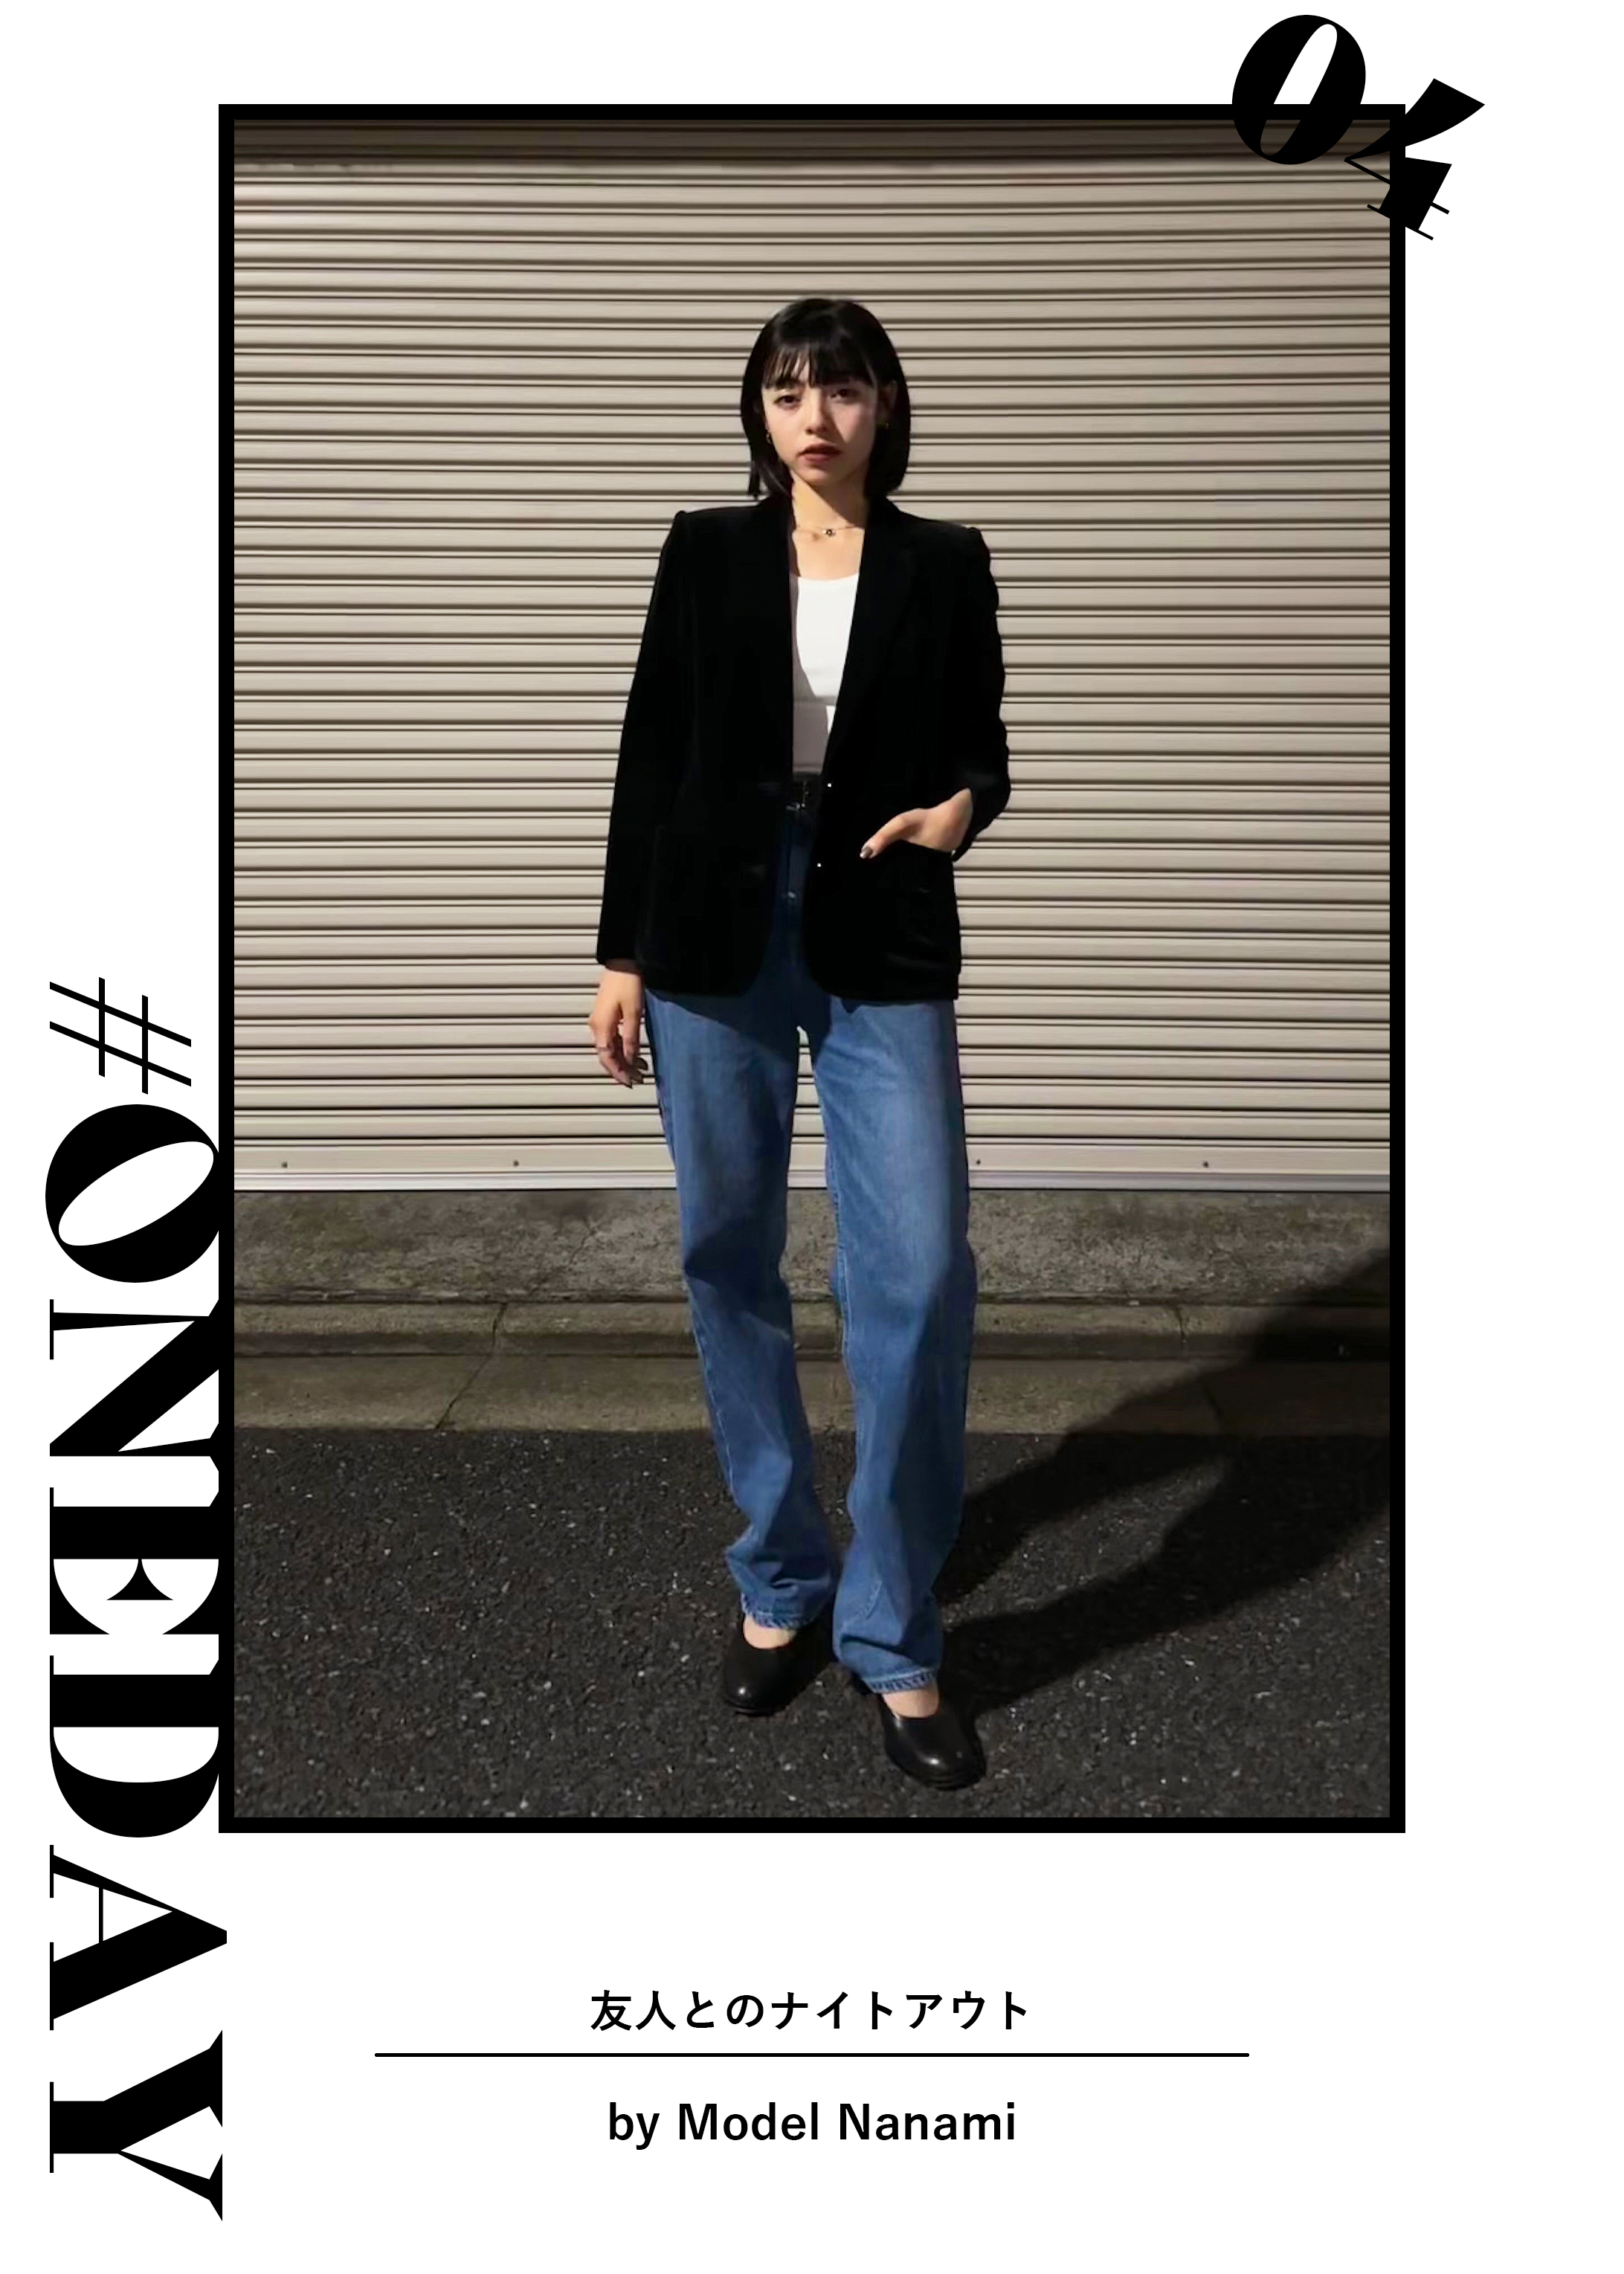 Her Denim Style One-Day -RED CARD TOKYO-